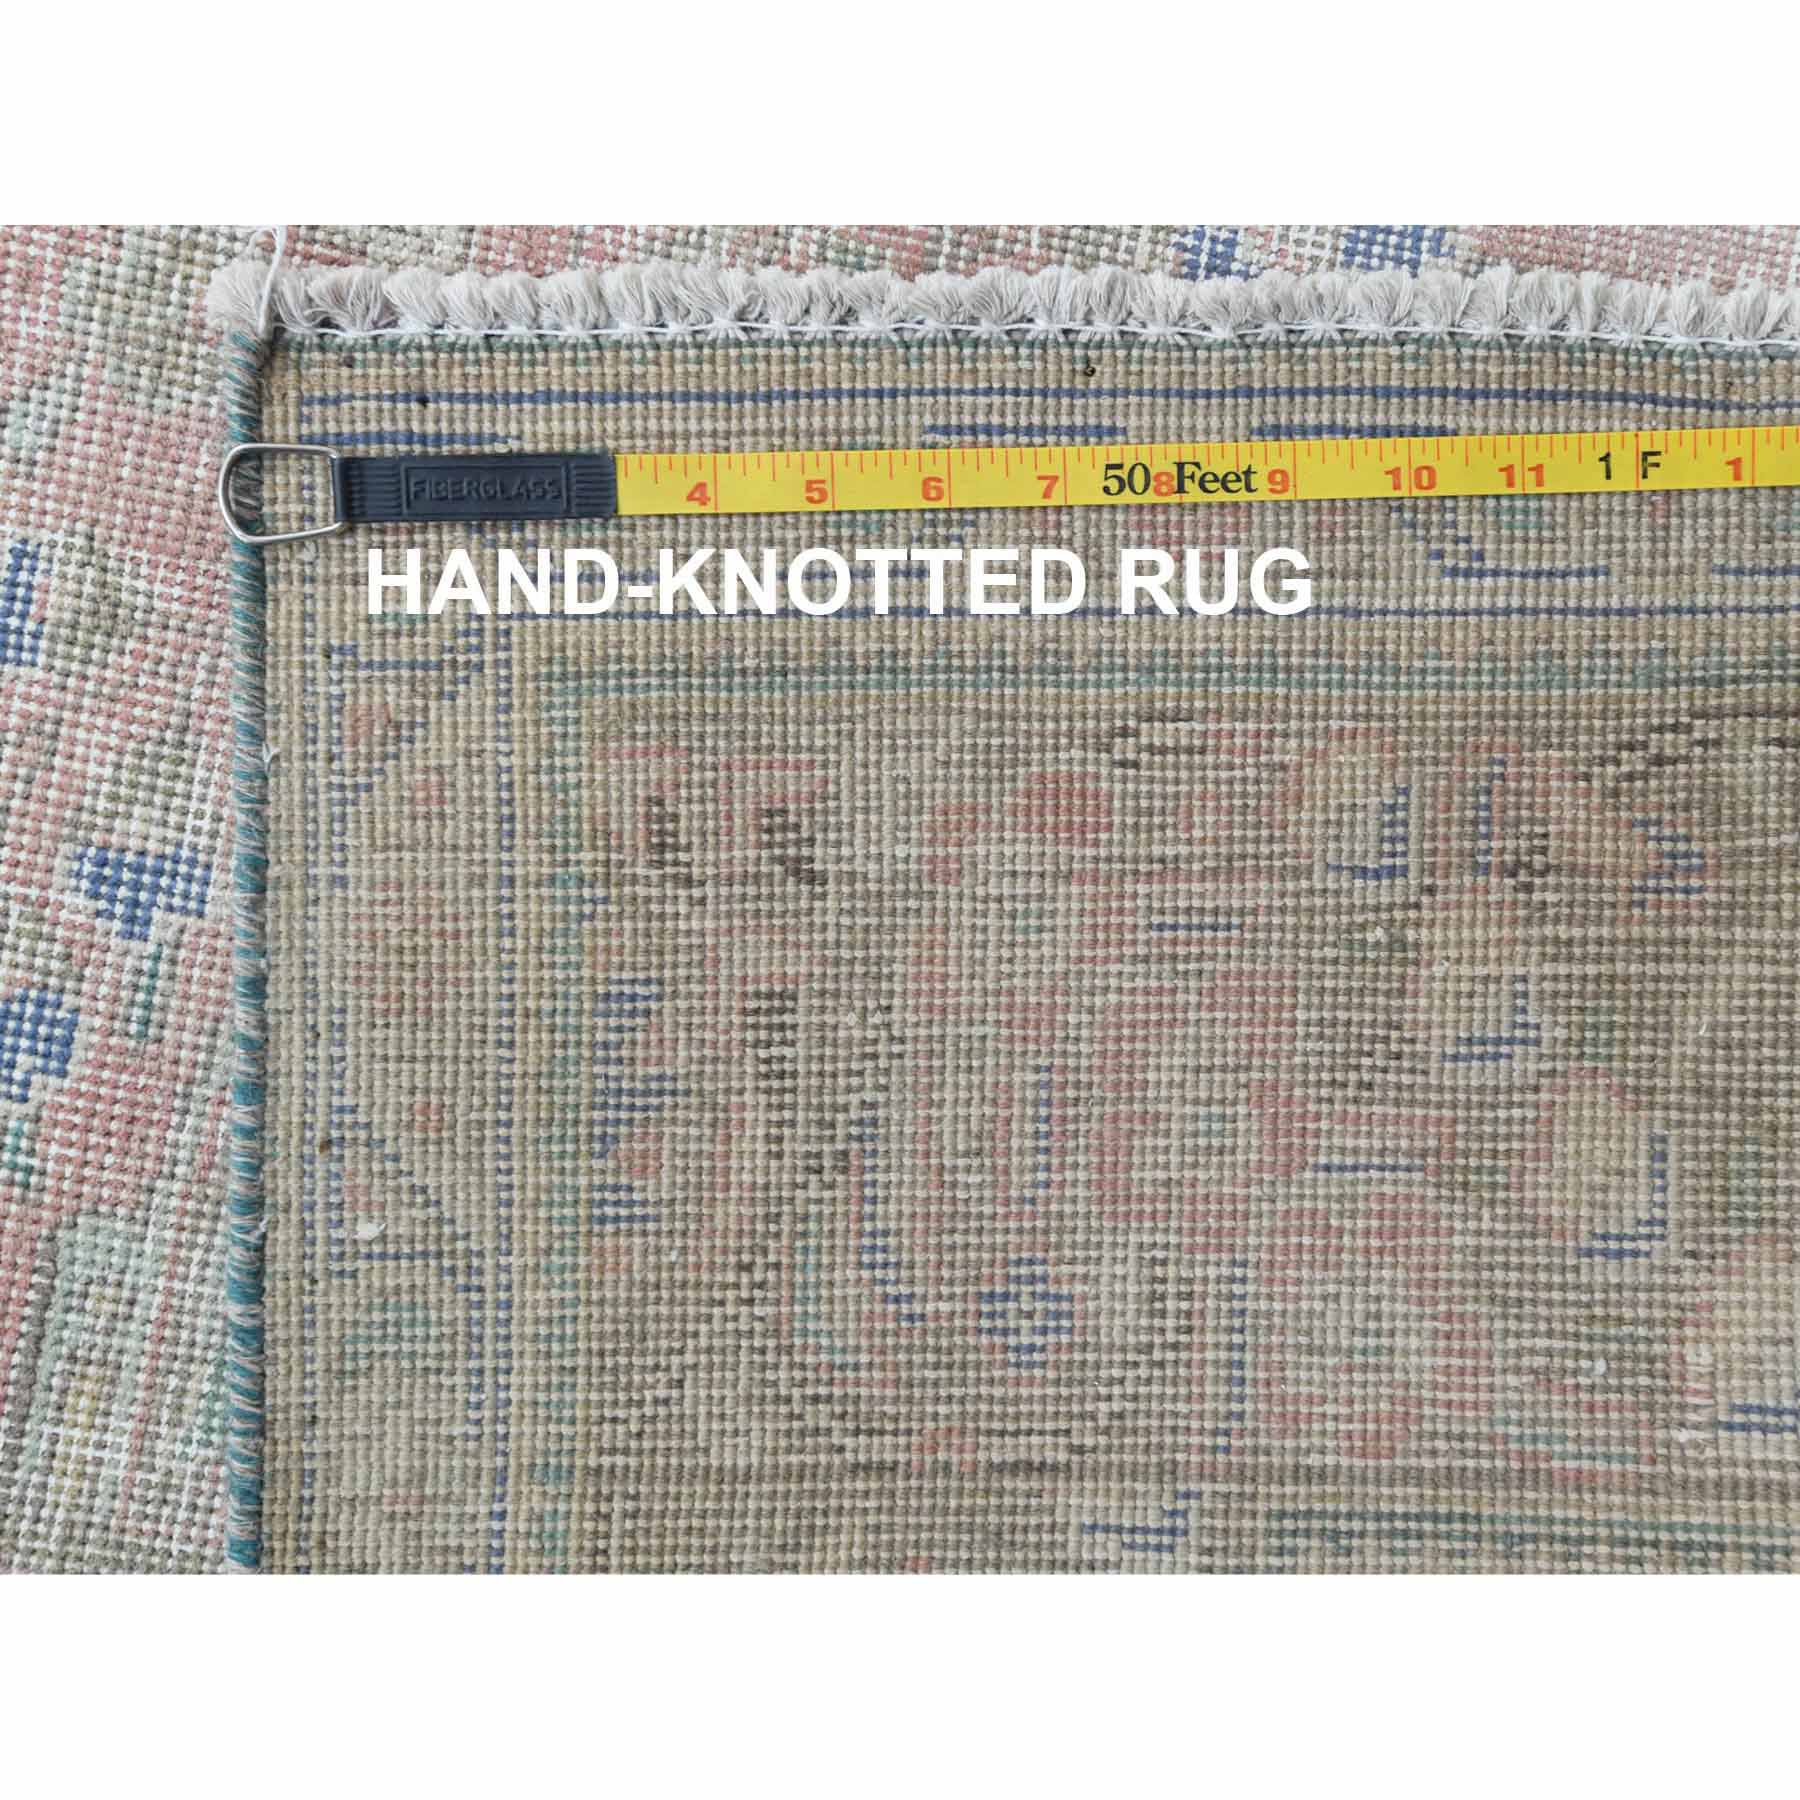 White-Wash-Vintage-Silver-Wash-Hand-Knotted-Rug-300930